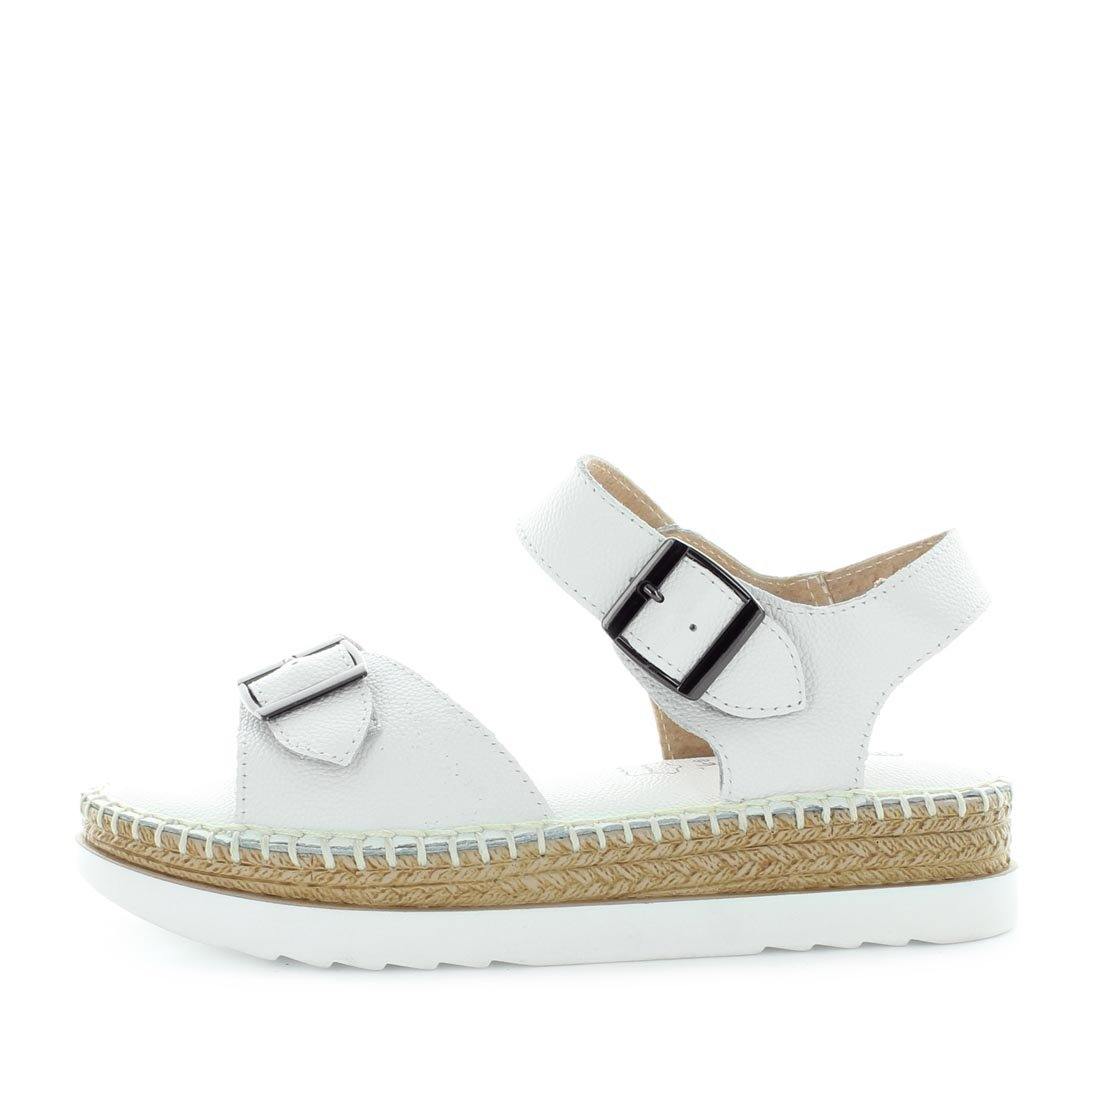 Cilia - just bee - just bee comfort - Platform outsole leather women's sandals with twin buckles - padded footbed - comfort women's flats - women's sandals - leather sandals - comfort platform sandals - rear and top strap for a more secure fit (6604840271951)